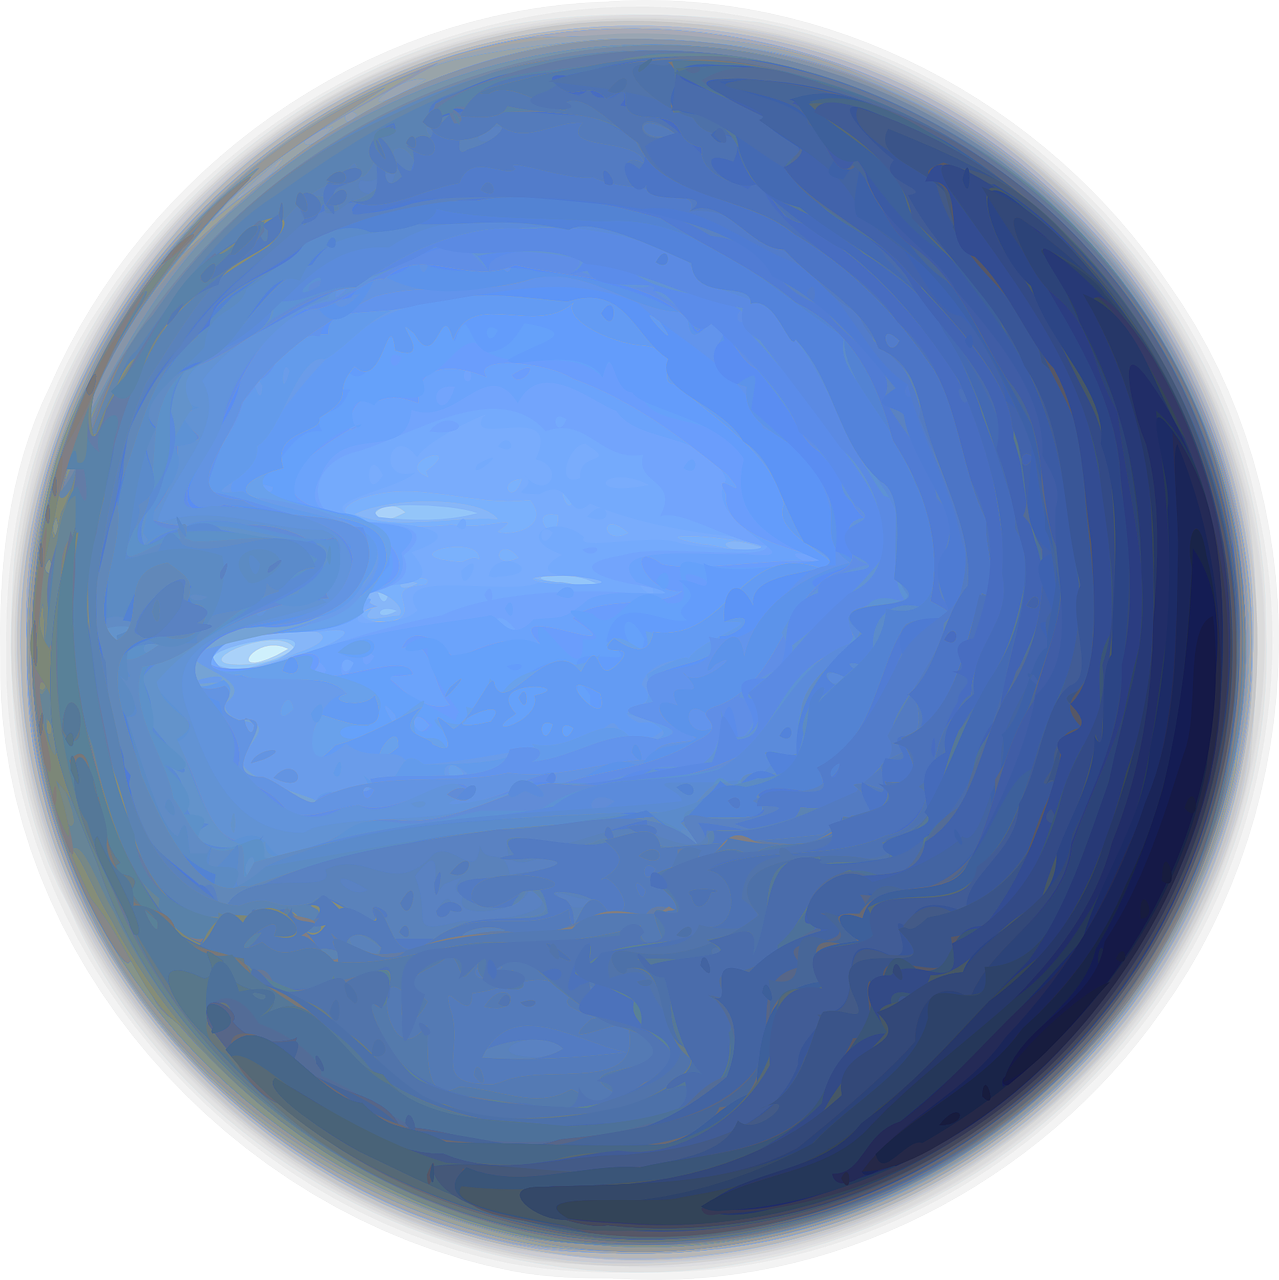 drawing of the planet neptune